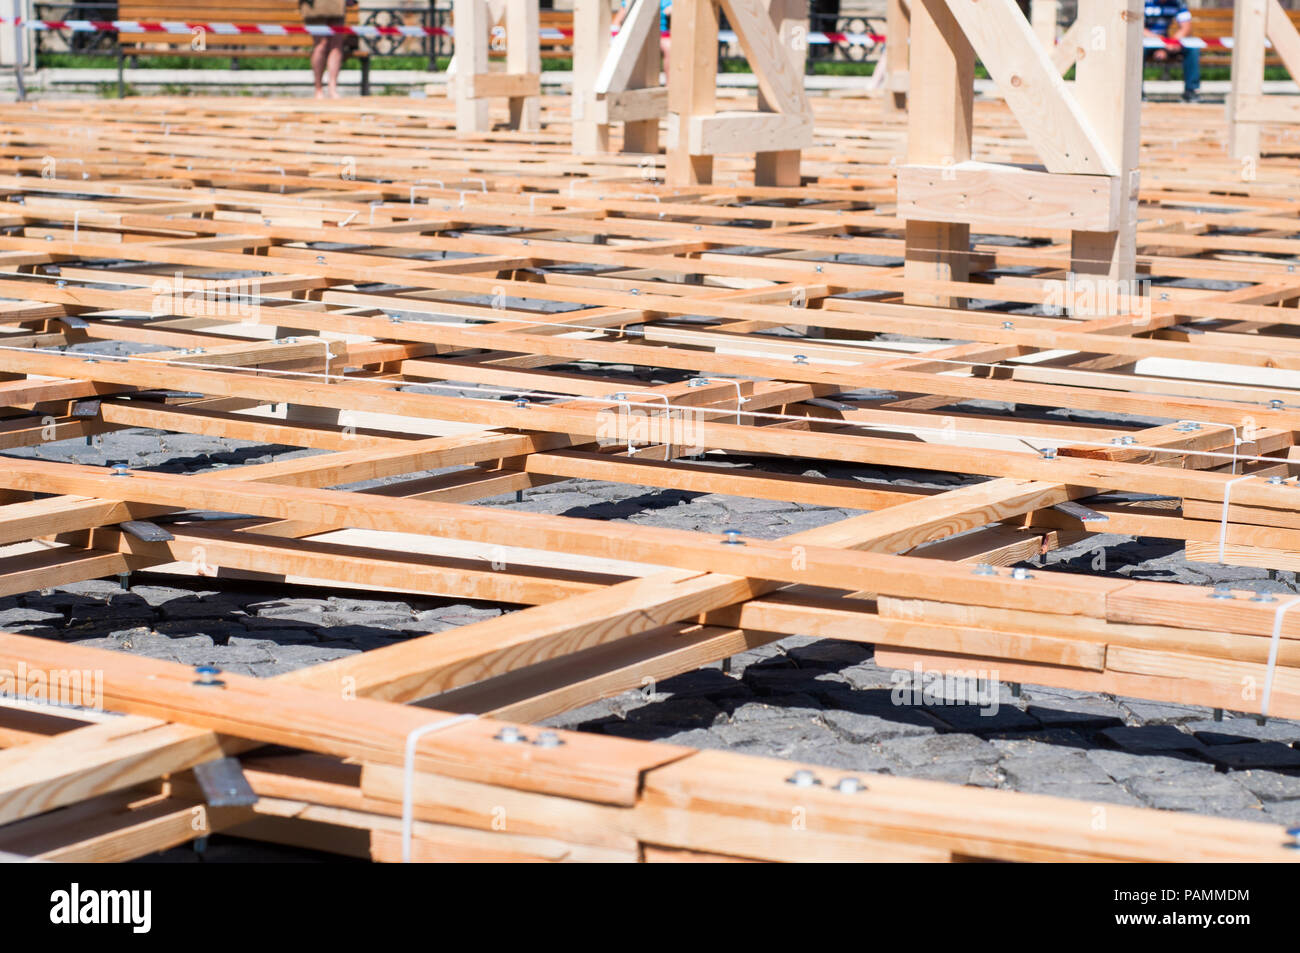 Wood planks with bolted joists from a parametric pavillion Stock Photo